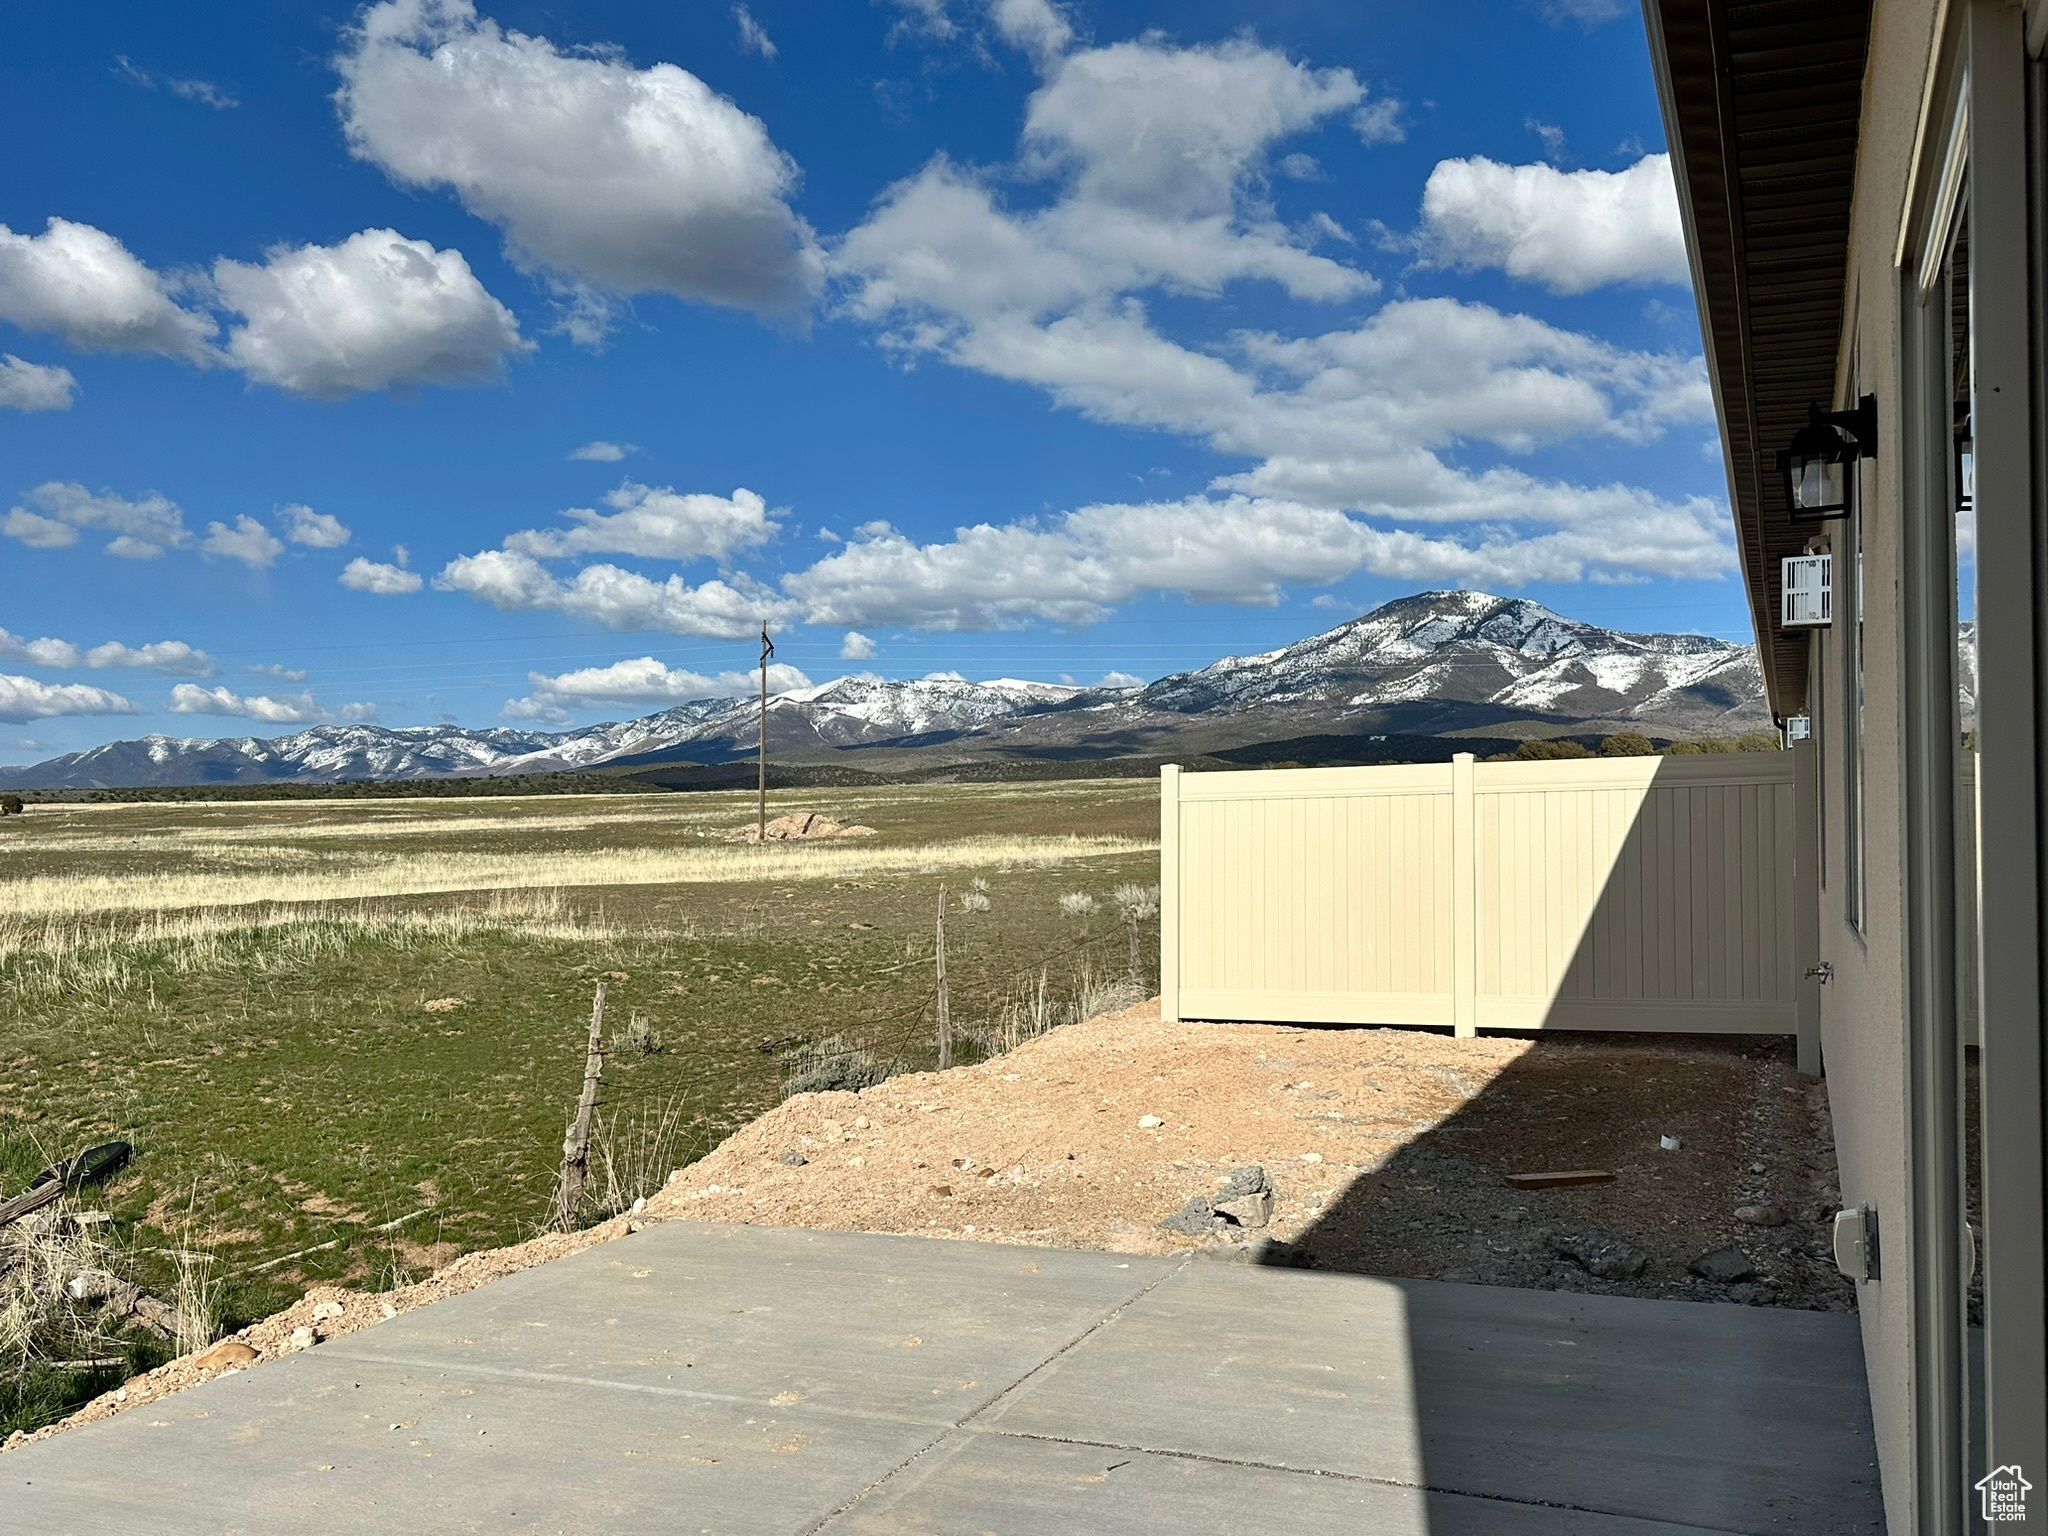 View of yard with a patio area and a mountain view